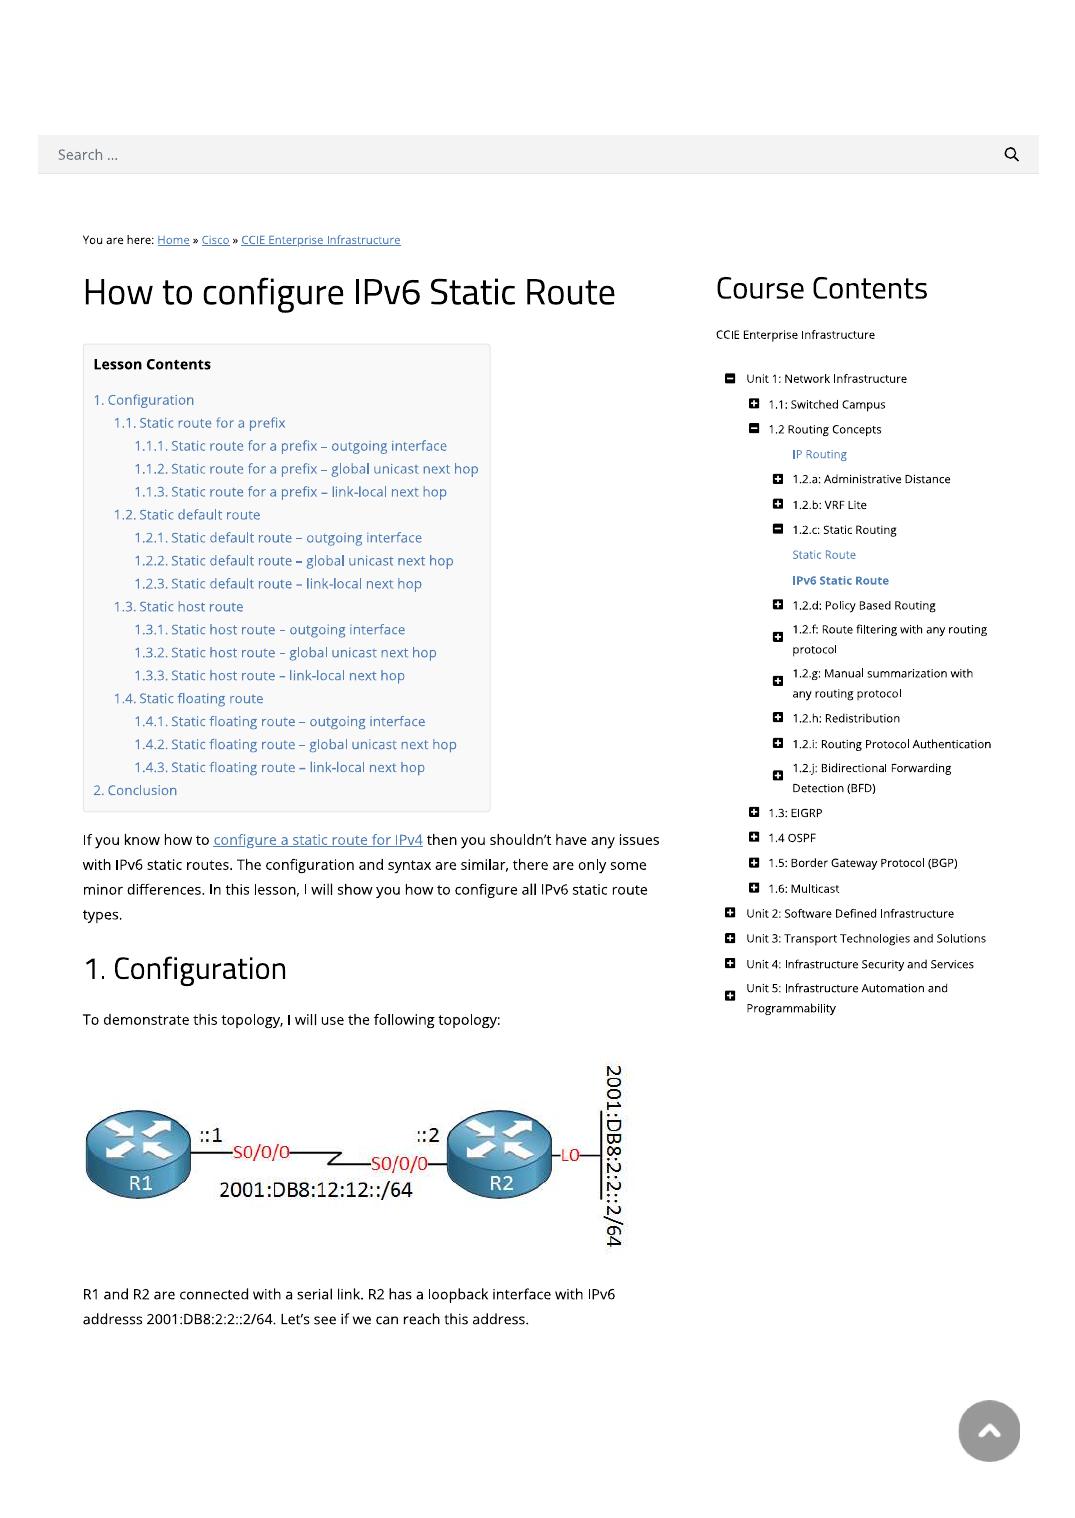 How to configure IPv6 Static Route by Rohan